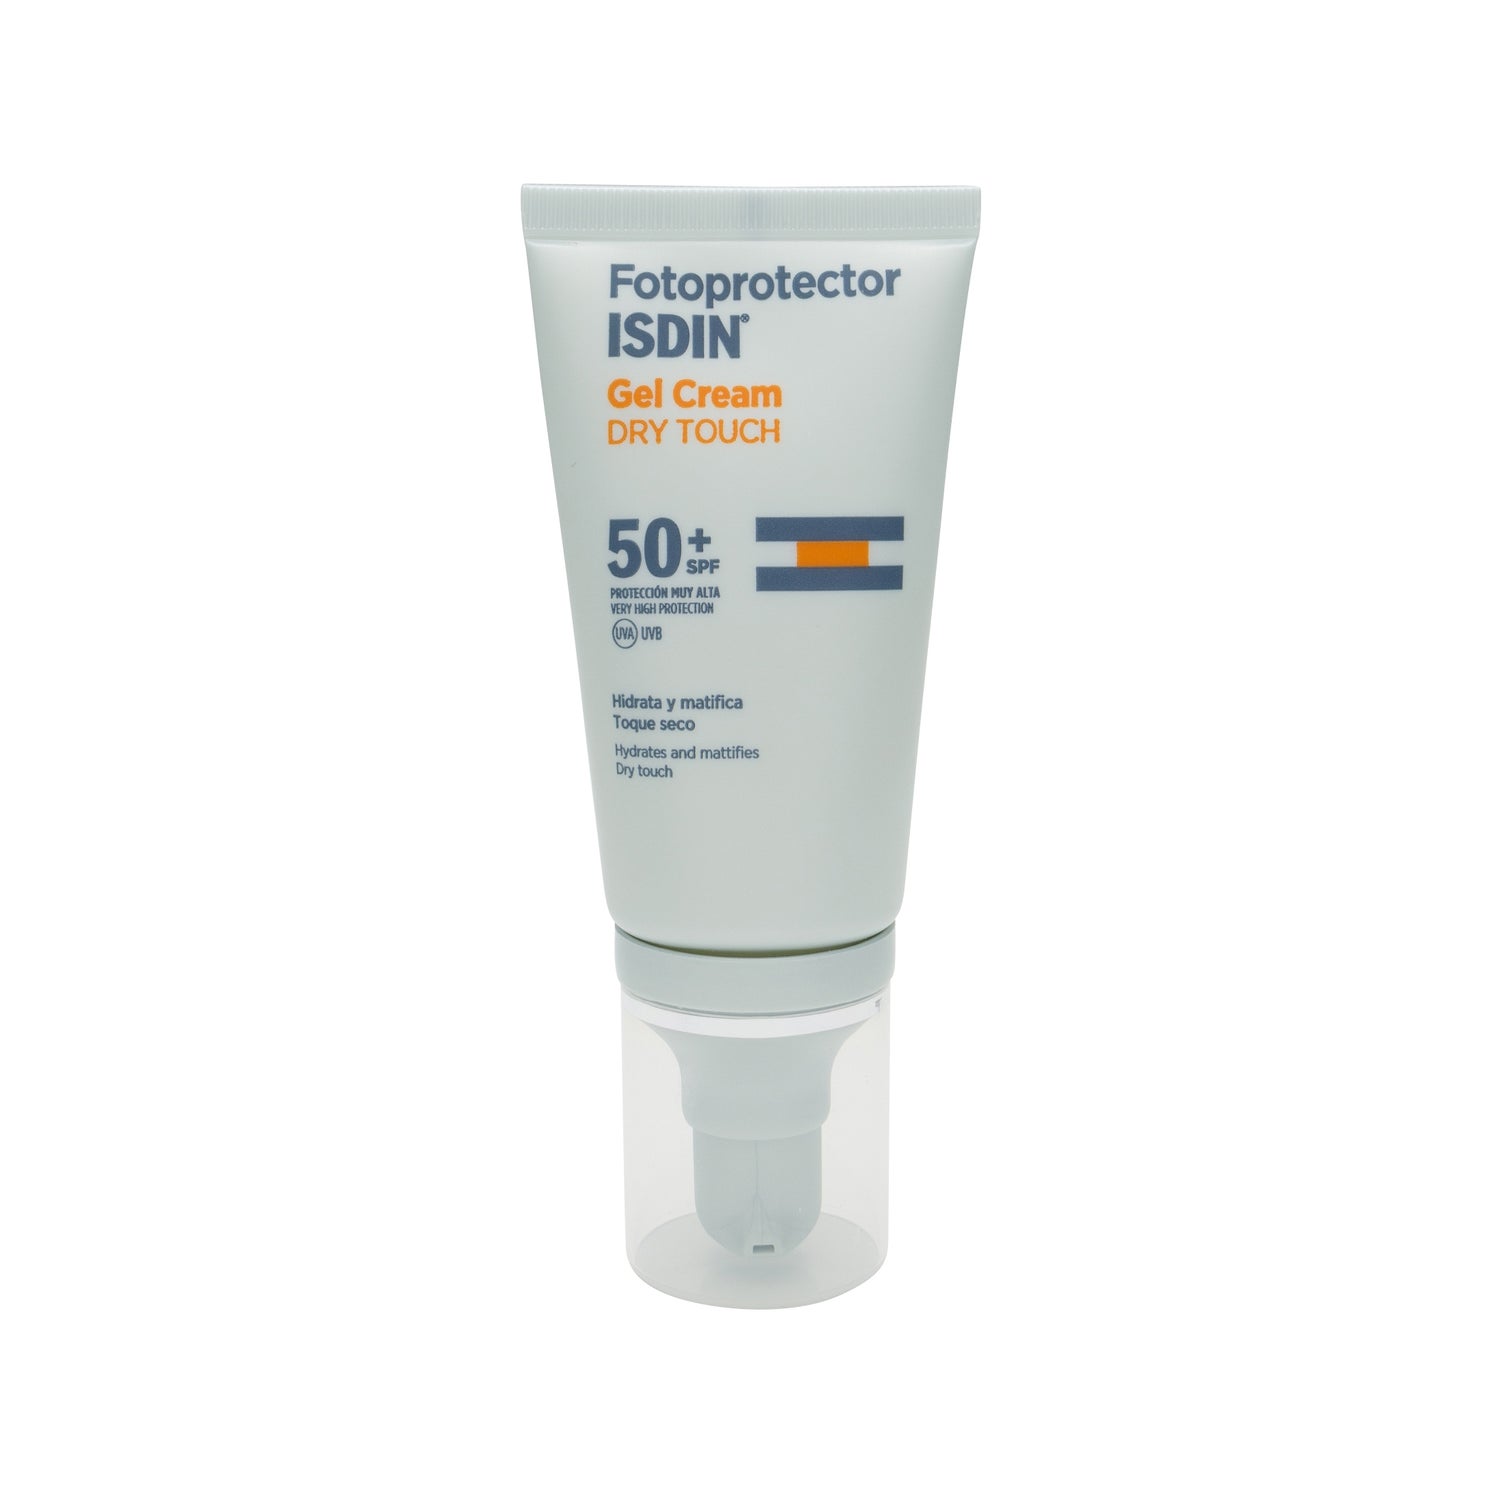 fotoprotector isdin dry touch gel crema spf50 50ml